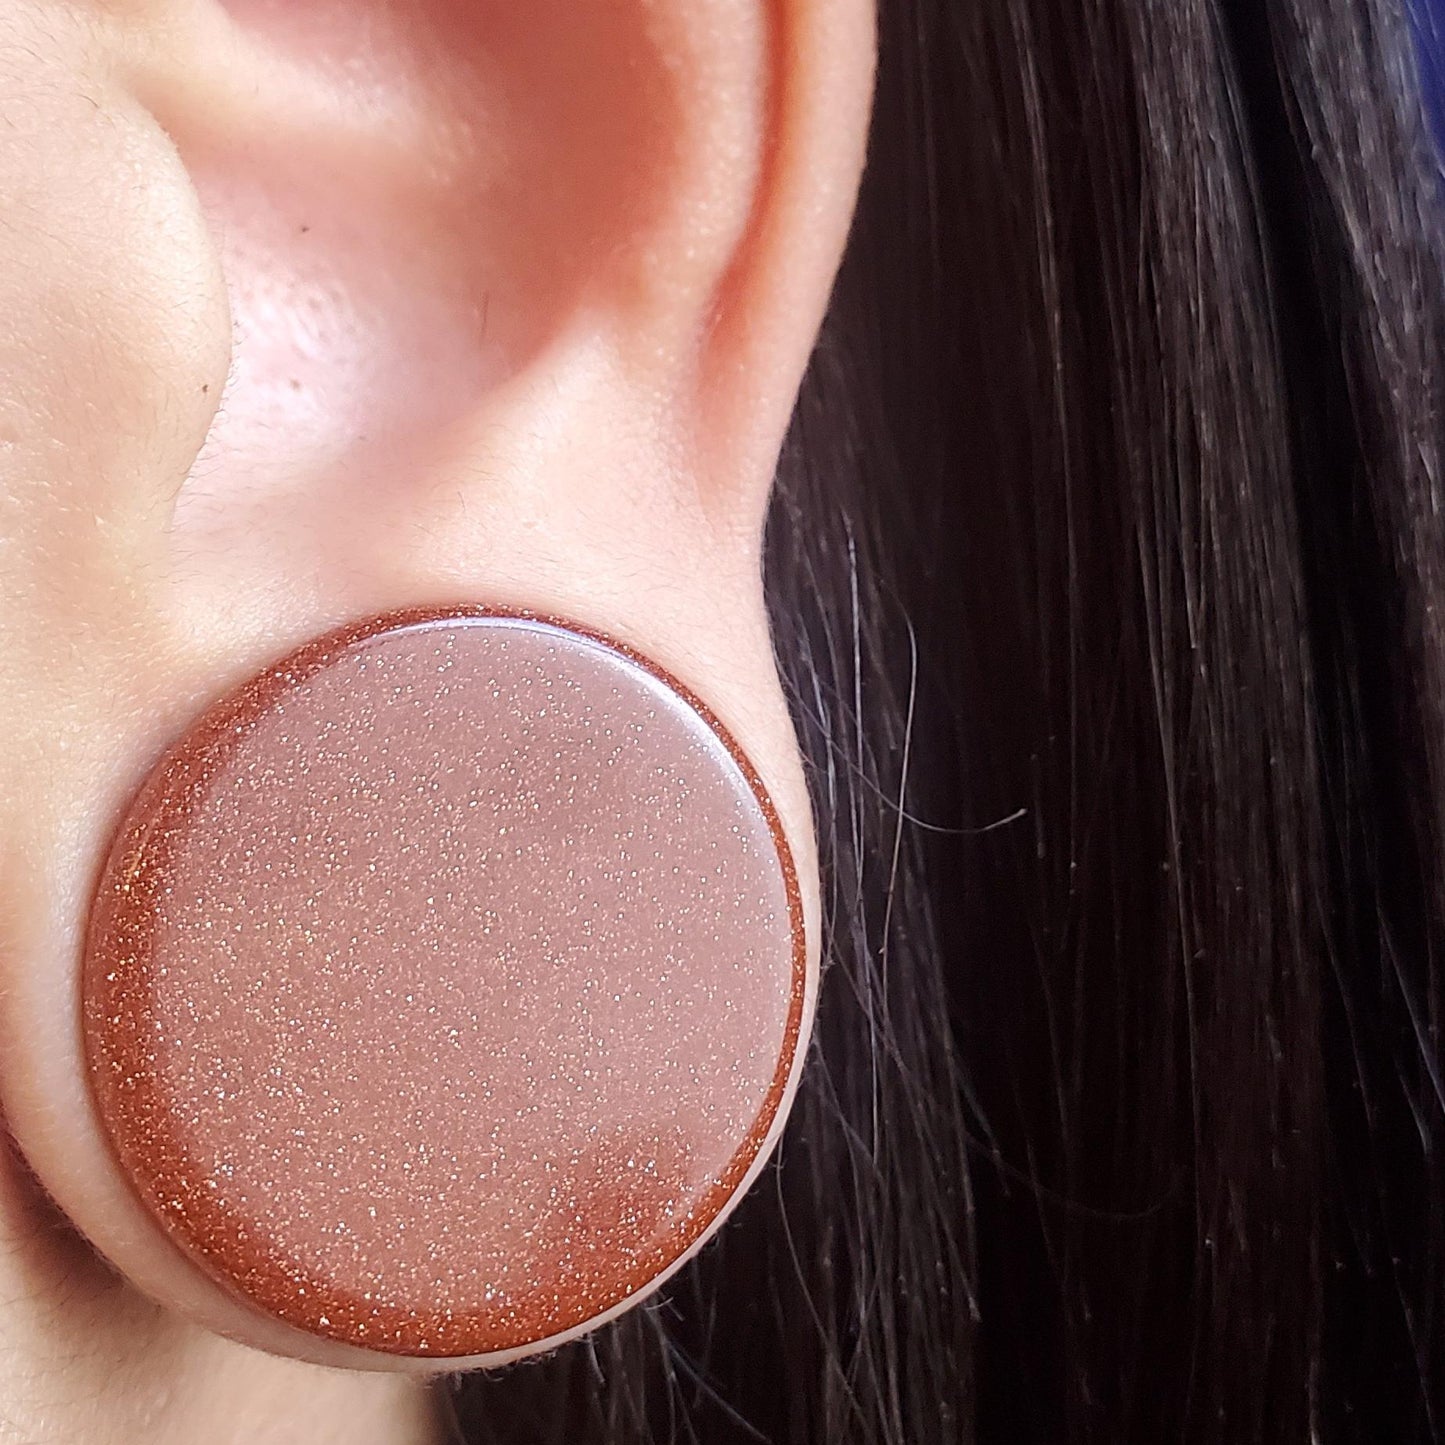 Gold Sand Stone Double Flare Plugs